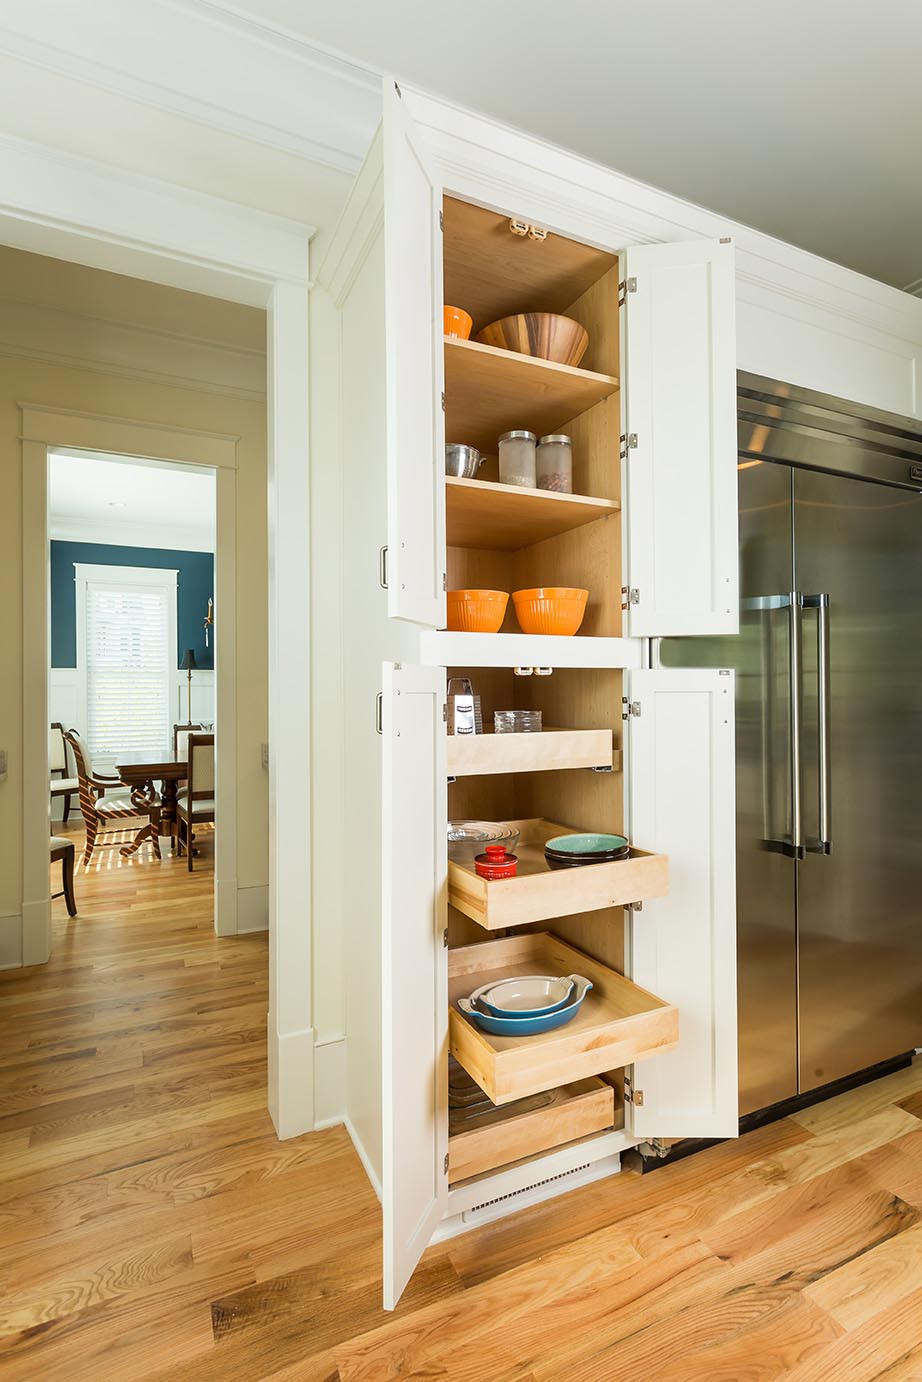 Tall White Kitchen Storage Cabinet
 Luxury South Carolina Home features Inset Shaker Cabinets